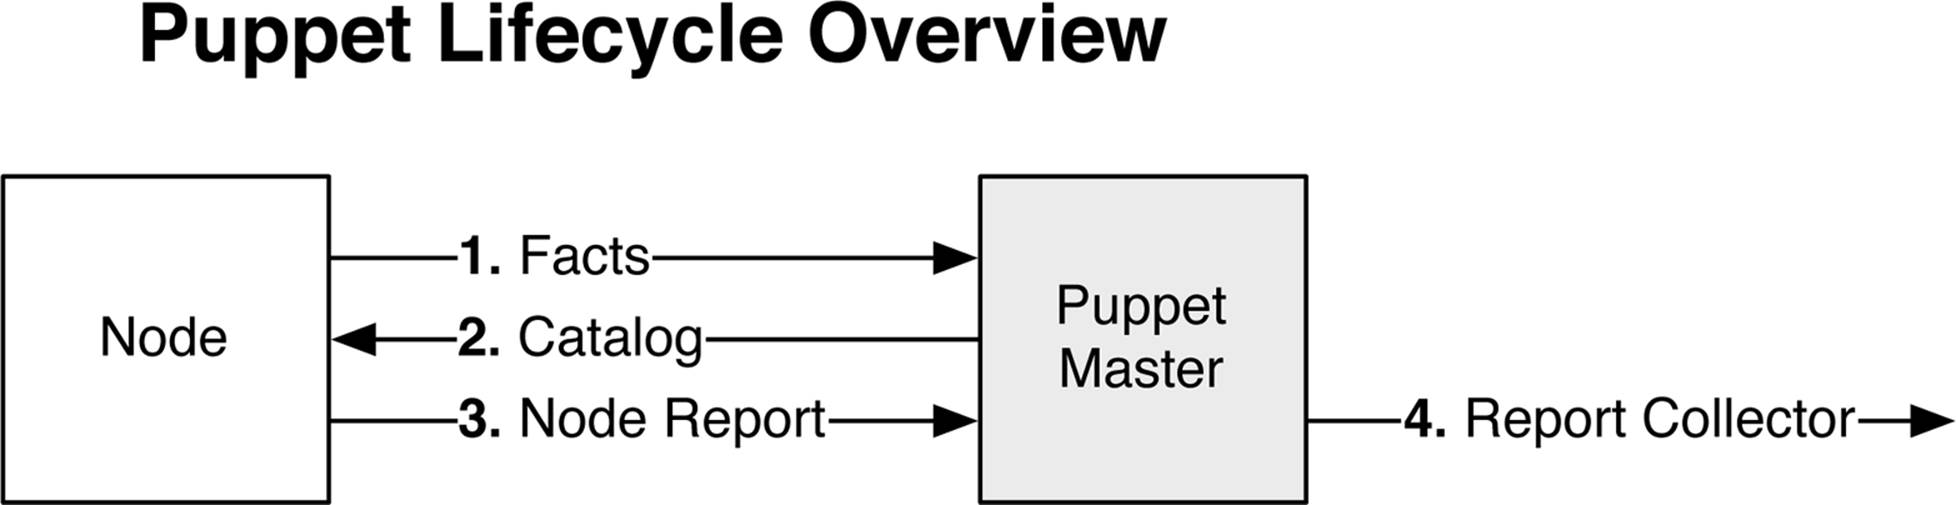 Puppet lifecycle overview